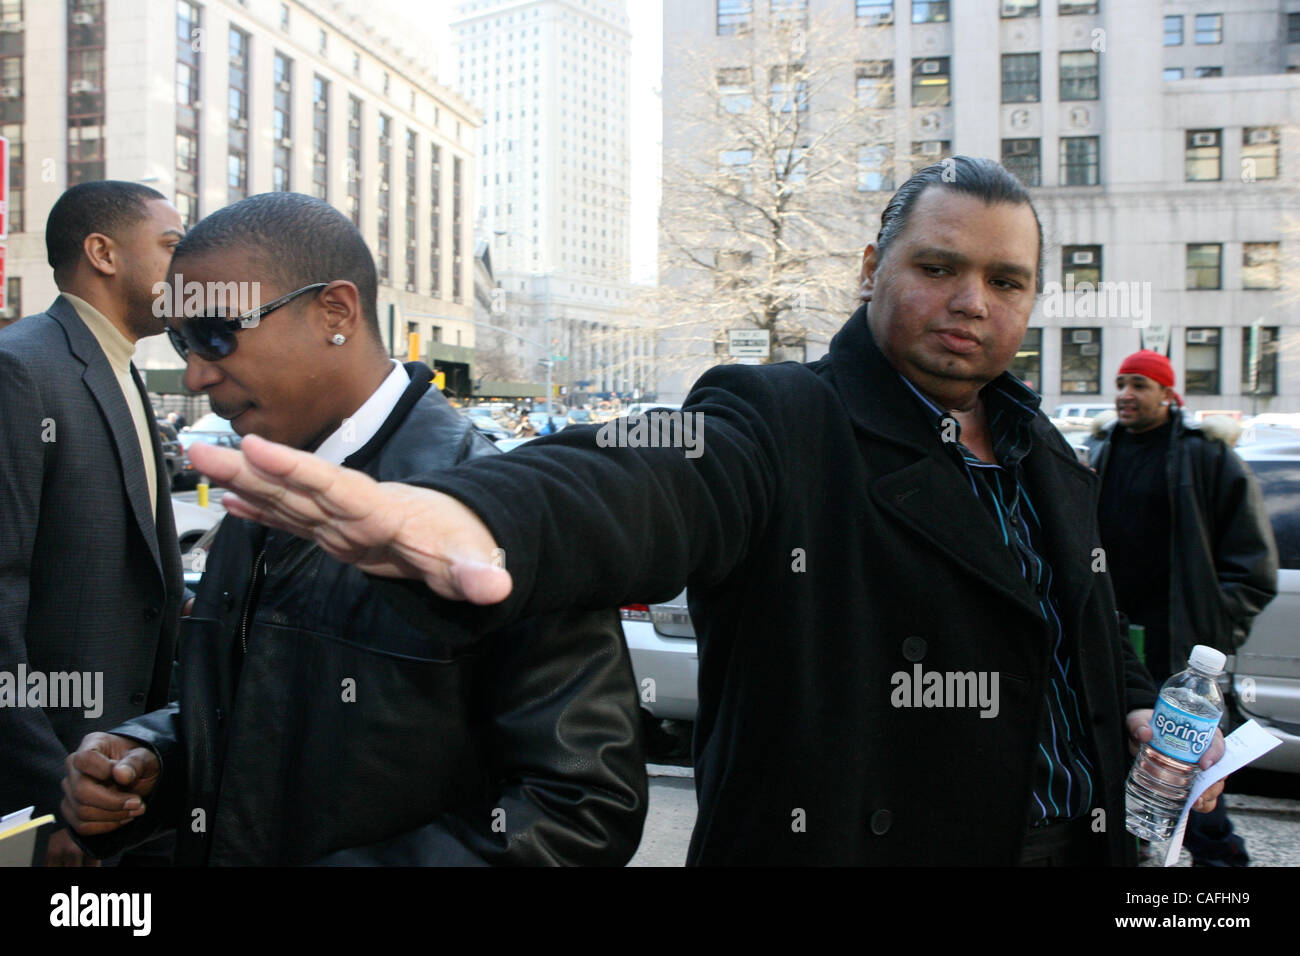 Co-defendant with rapper Ja Rule, Mohamed Gamal leaving court. Rapper Ja-Rule (Jeffrey Atkins) leaving Manhattan Criminal court after attending a hearing for gun possession charge Feb. 27 2008. Photo Credit: Mariela Lombard/ ZUMA Press. Stock Photo